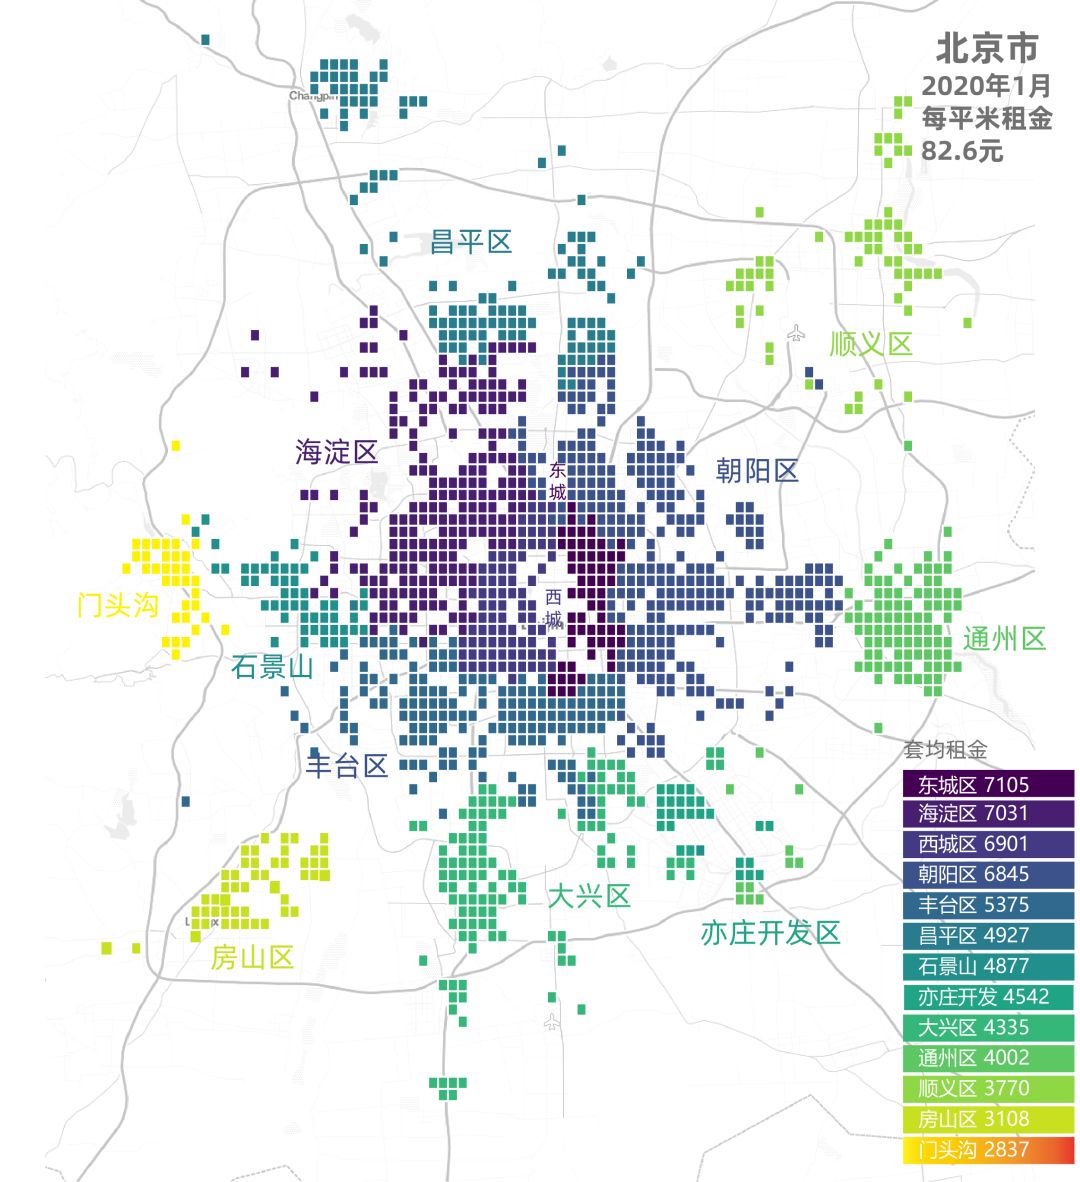 The latest rent map for Shell Finding House is available. The rents of 210 cities in 18 cities are here.